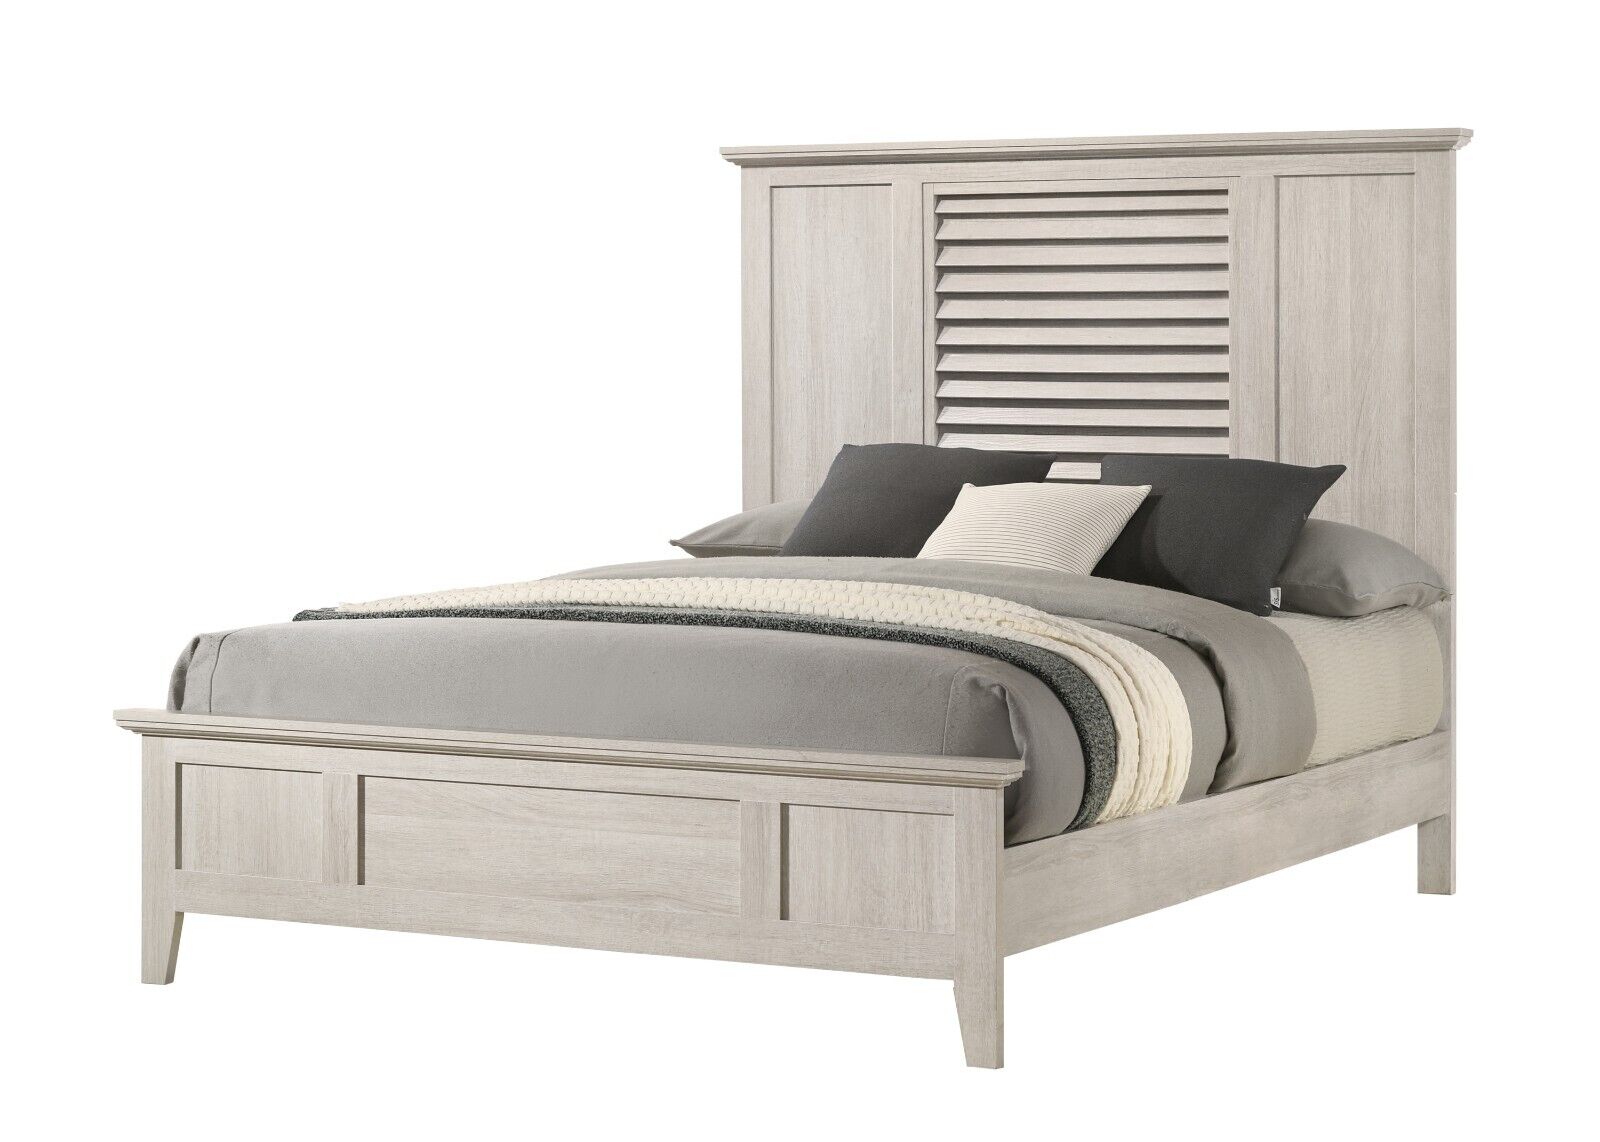 Esofastore 6pc Contemporary King Size Master Bedroom Set Panel Bed White Cream Solid Wood Wooden Furniture